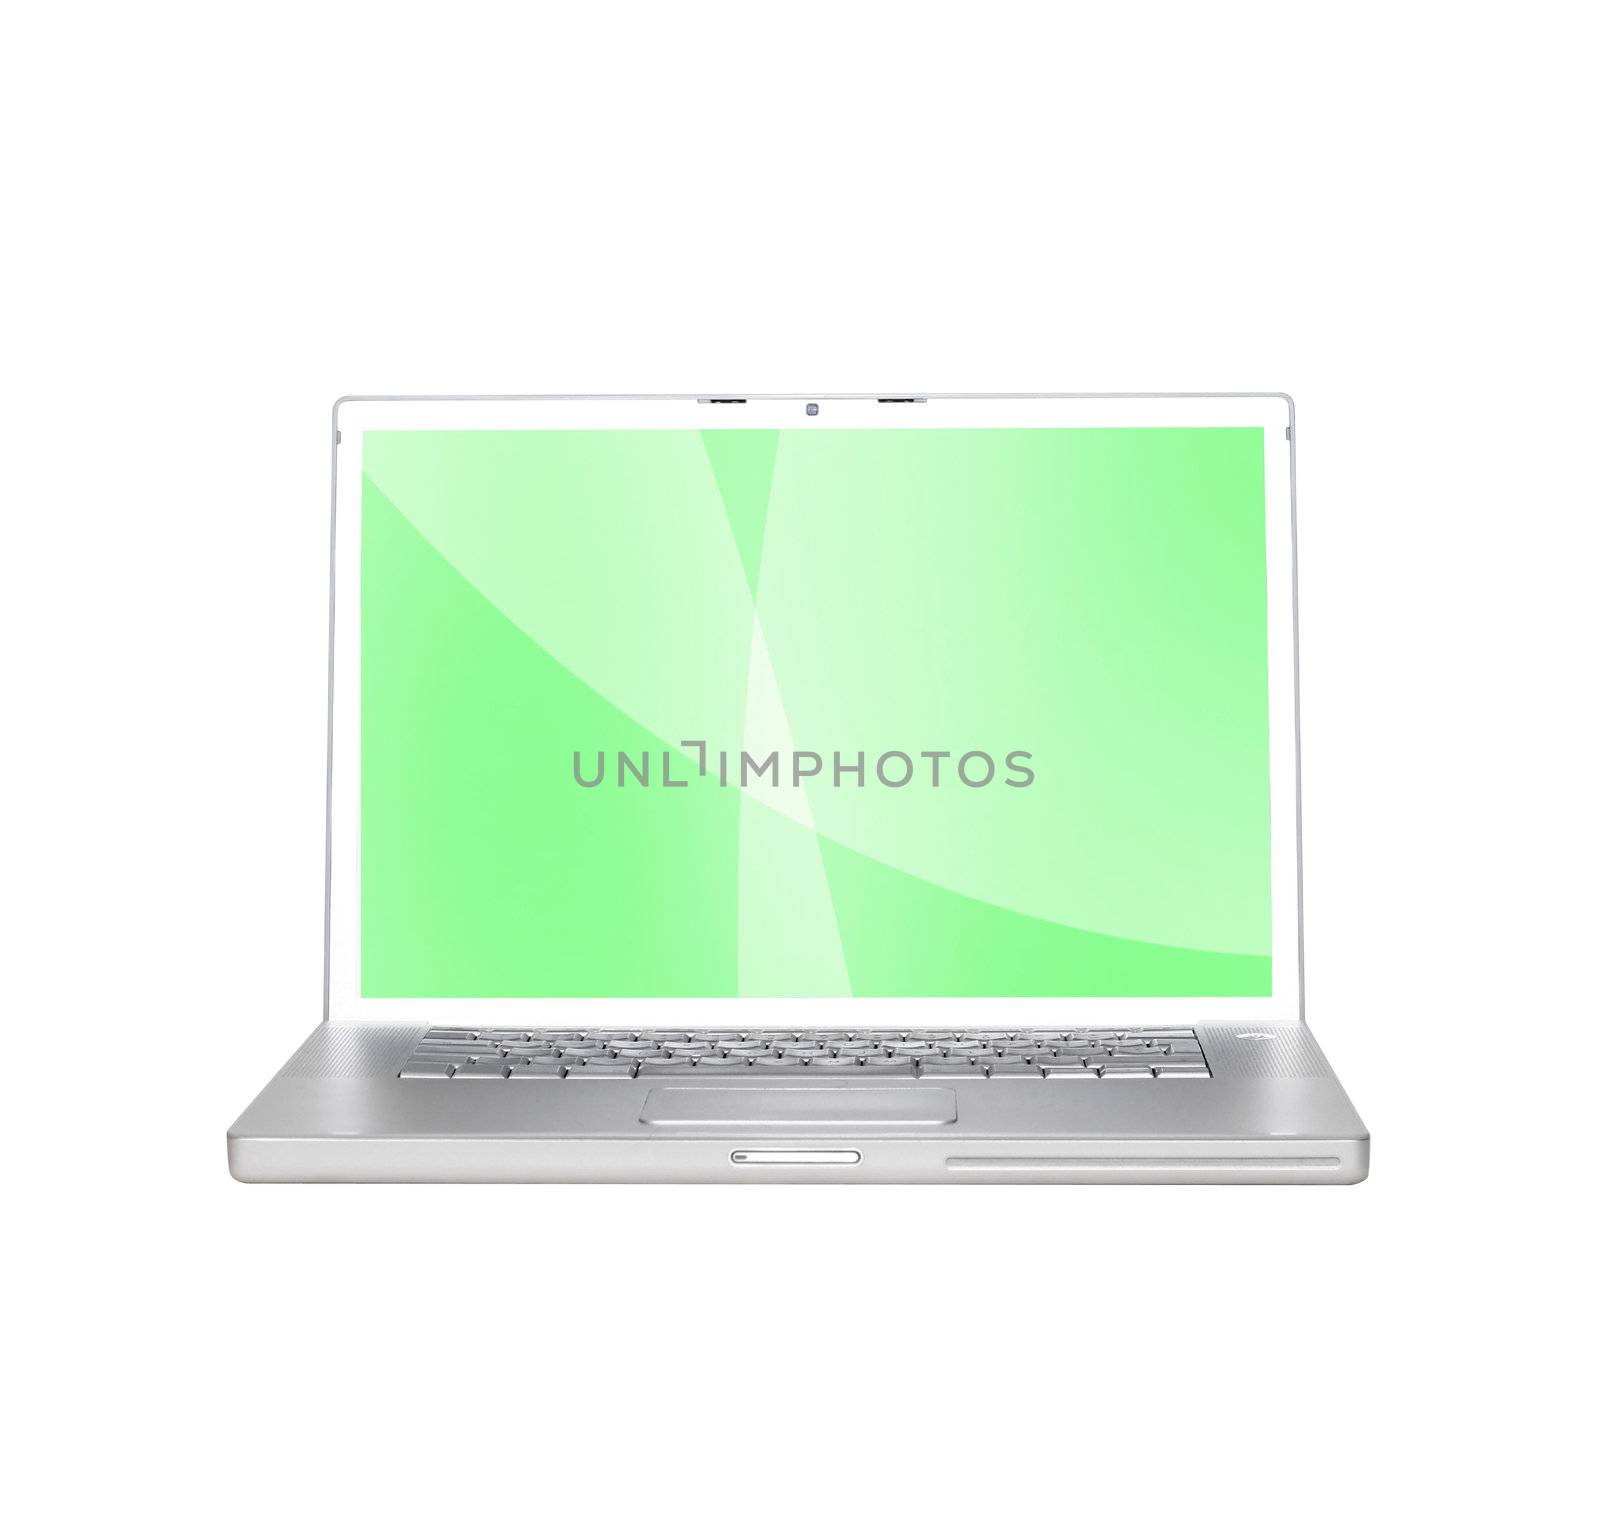 Laptop with background by leeser